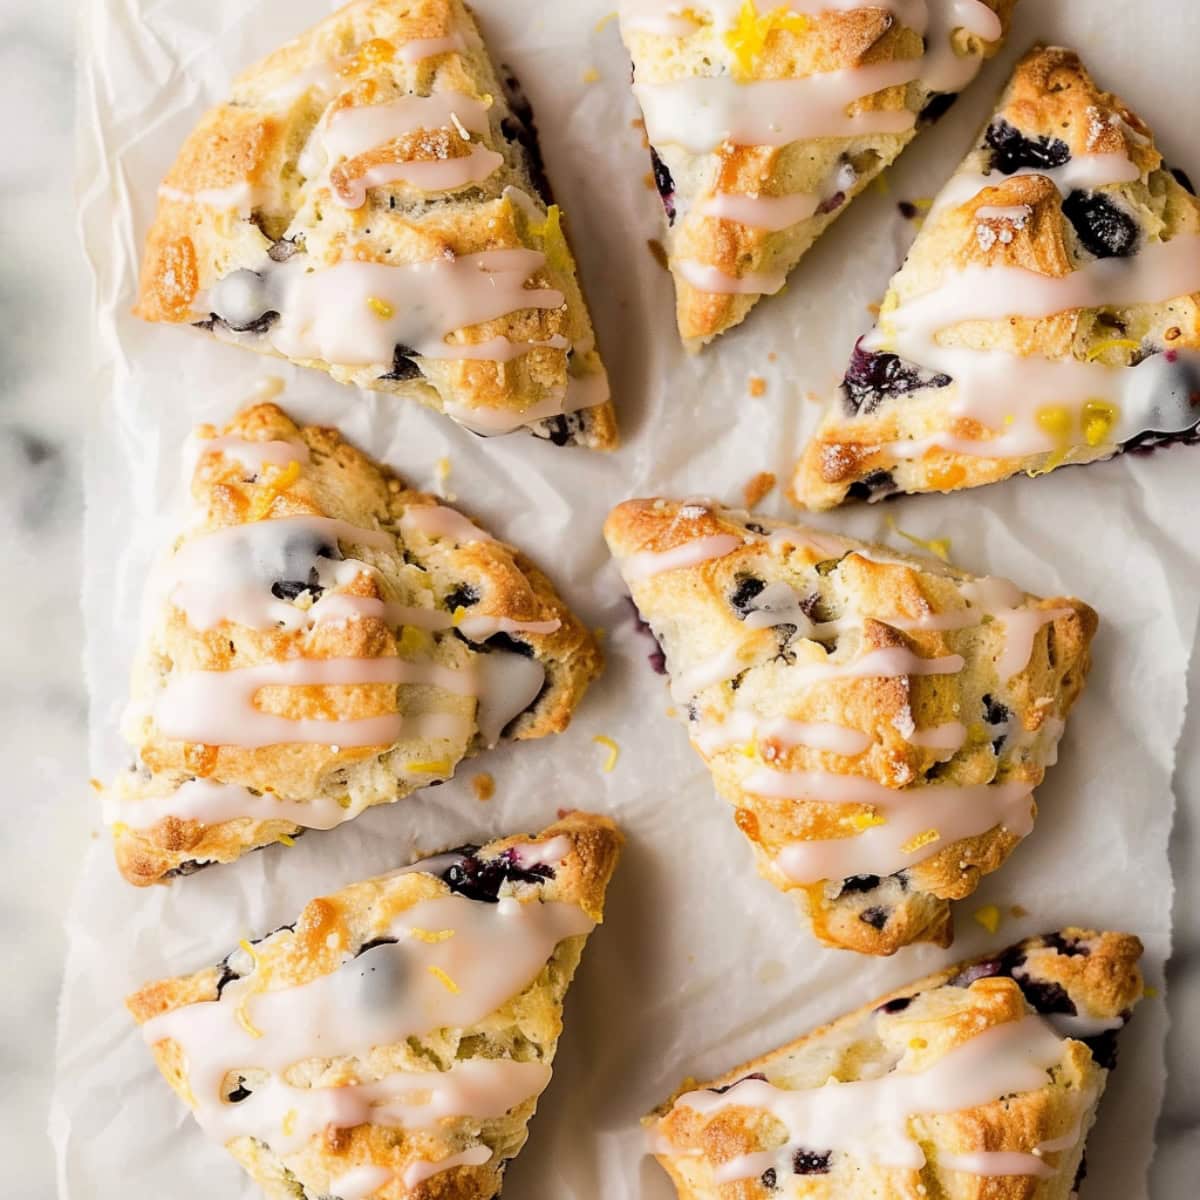 Comforting glazed lemon blueberry scones, ideal for breakfast or brunch, with a refreshing citrus aroma.